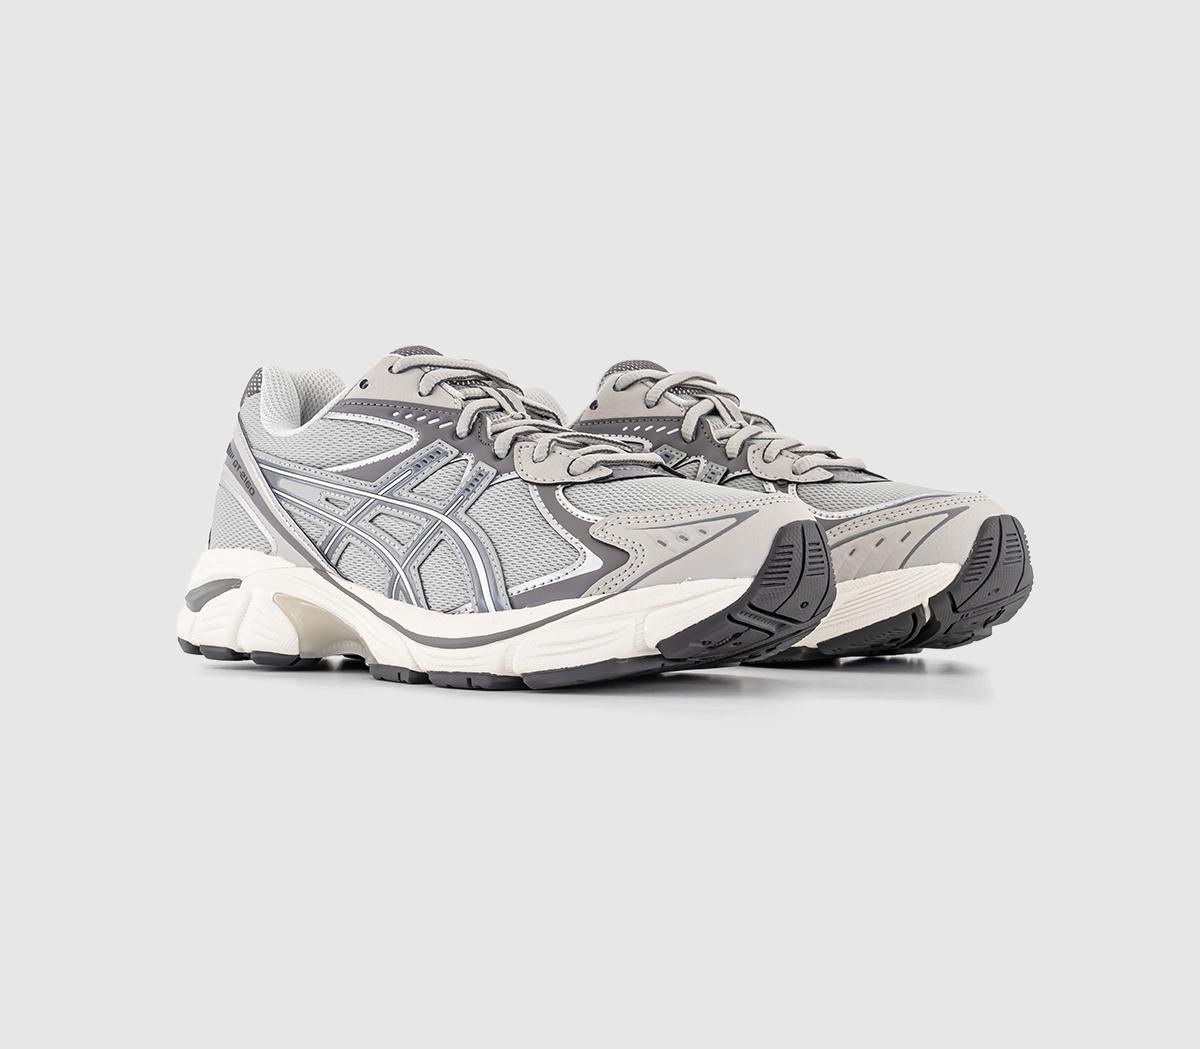 Asics Gt-2160 Trainers Oyster Grey Carbon, 11